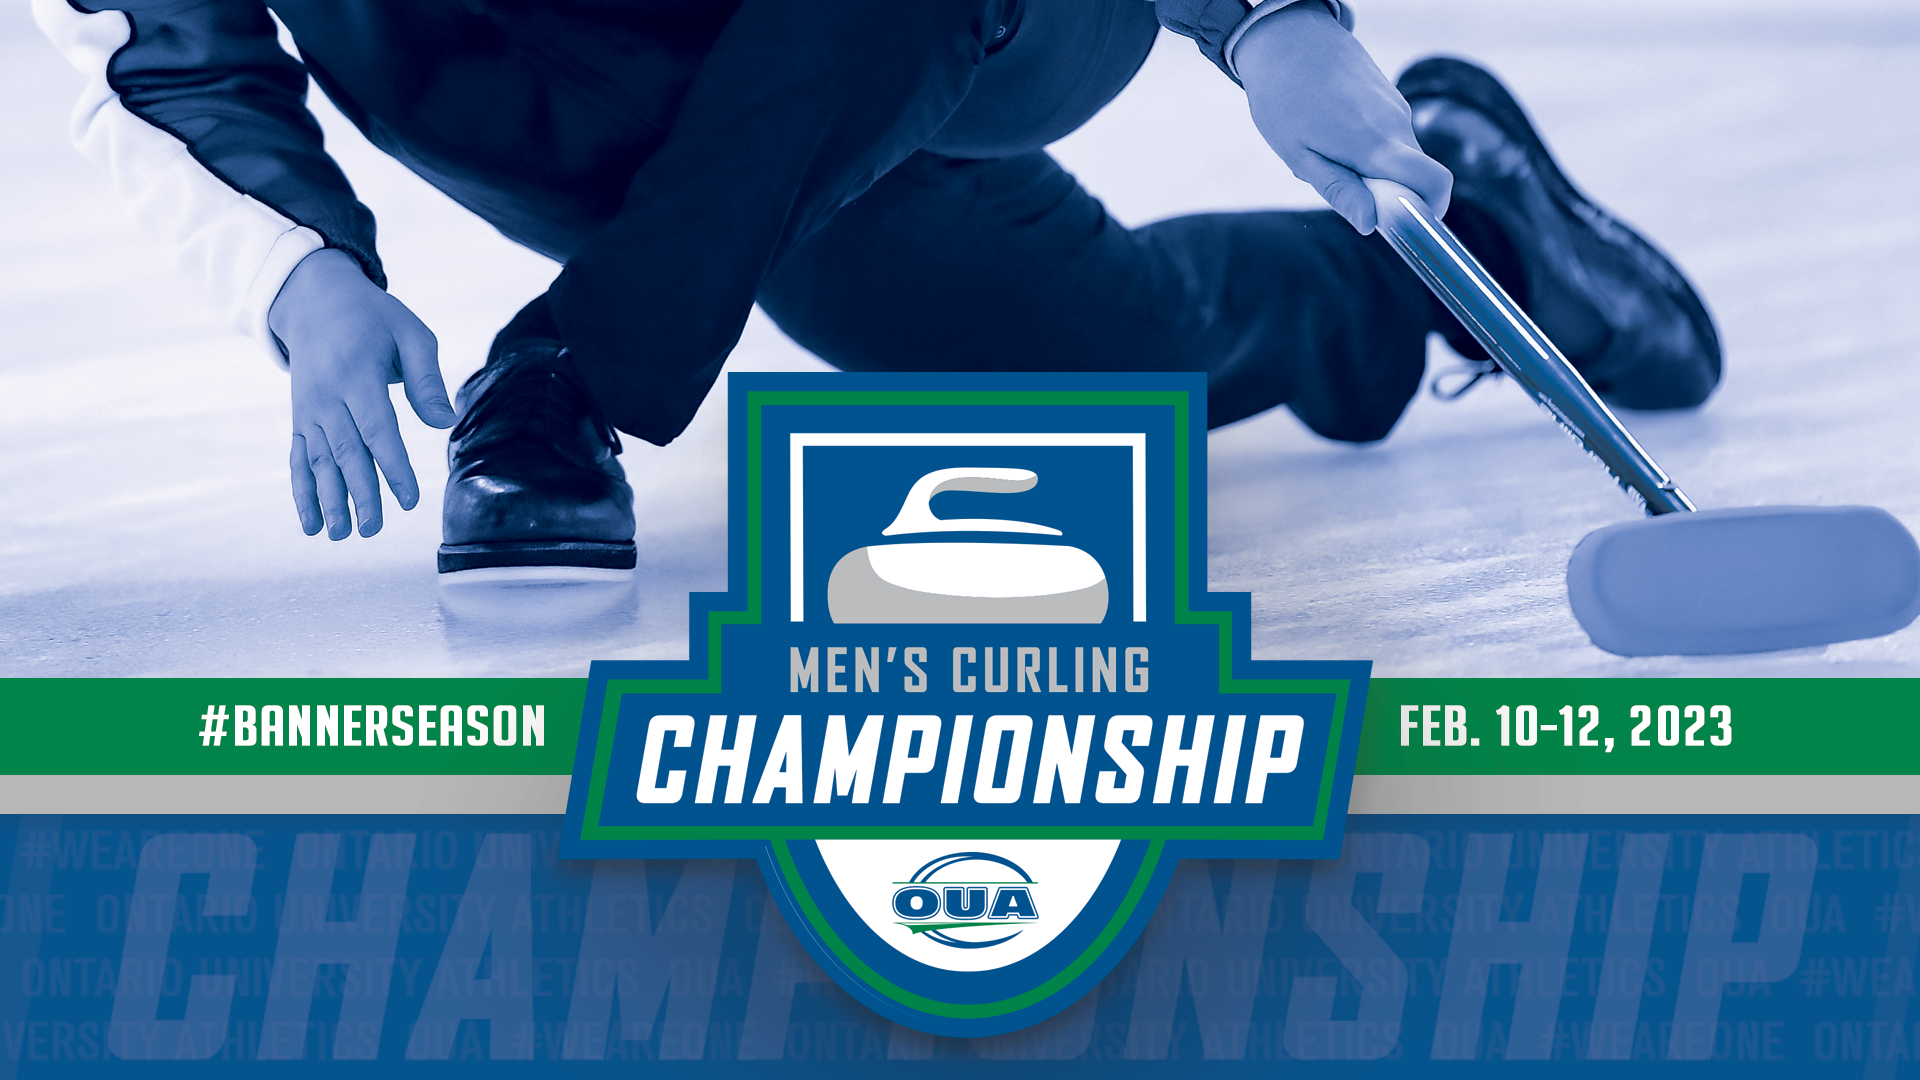 Banner Season: Provincial bonspiel bringing conference curlers to championship stage